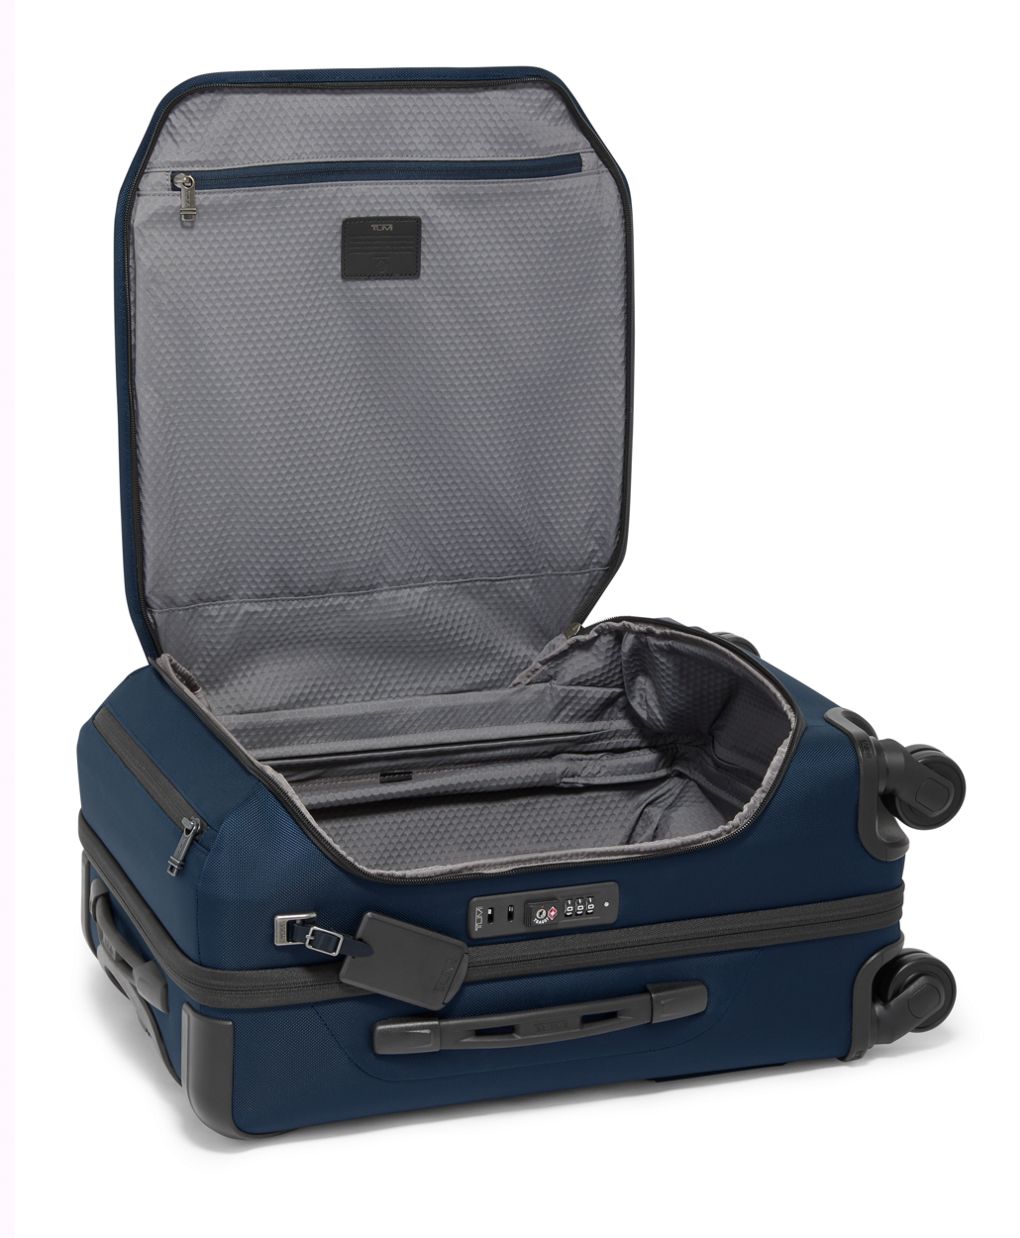 On Sale- TUMI Continental Front Lid Softside Expandable Carry-On Spinner- Floor model